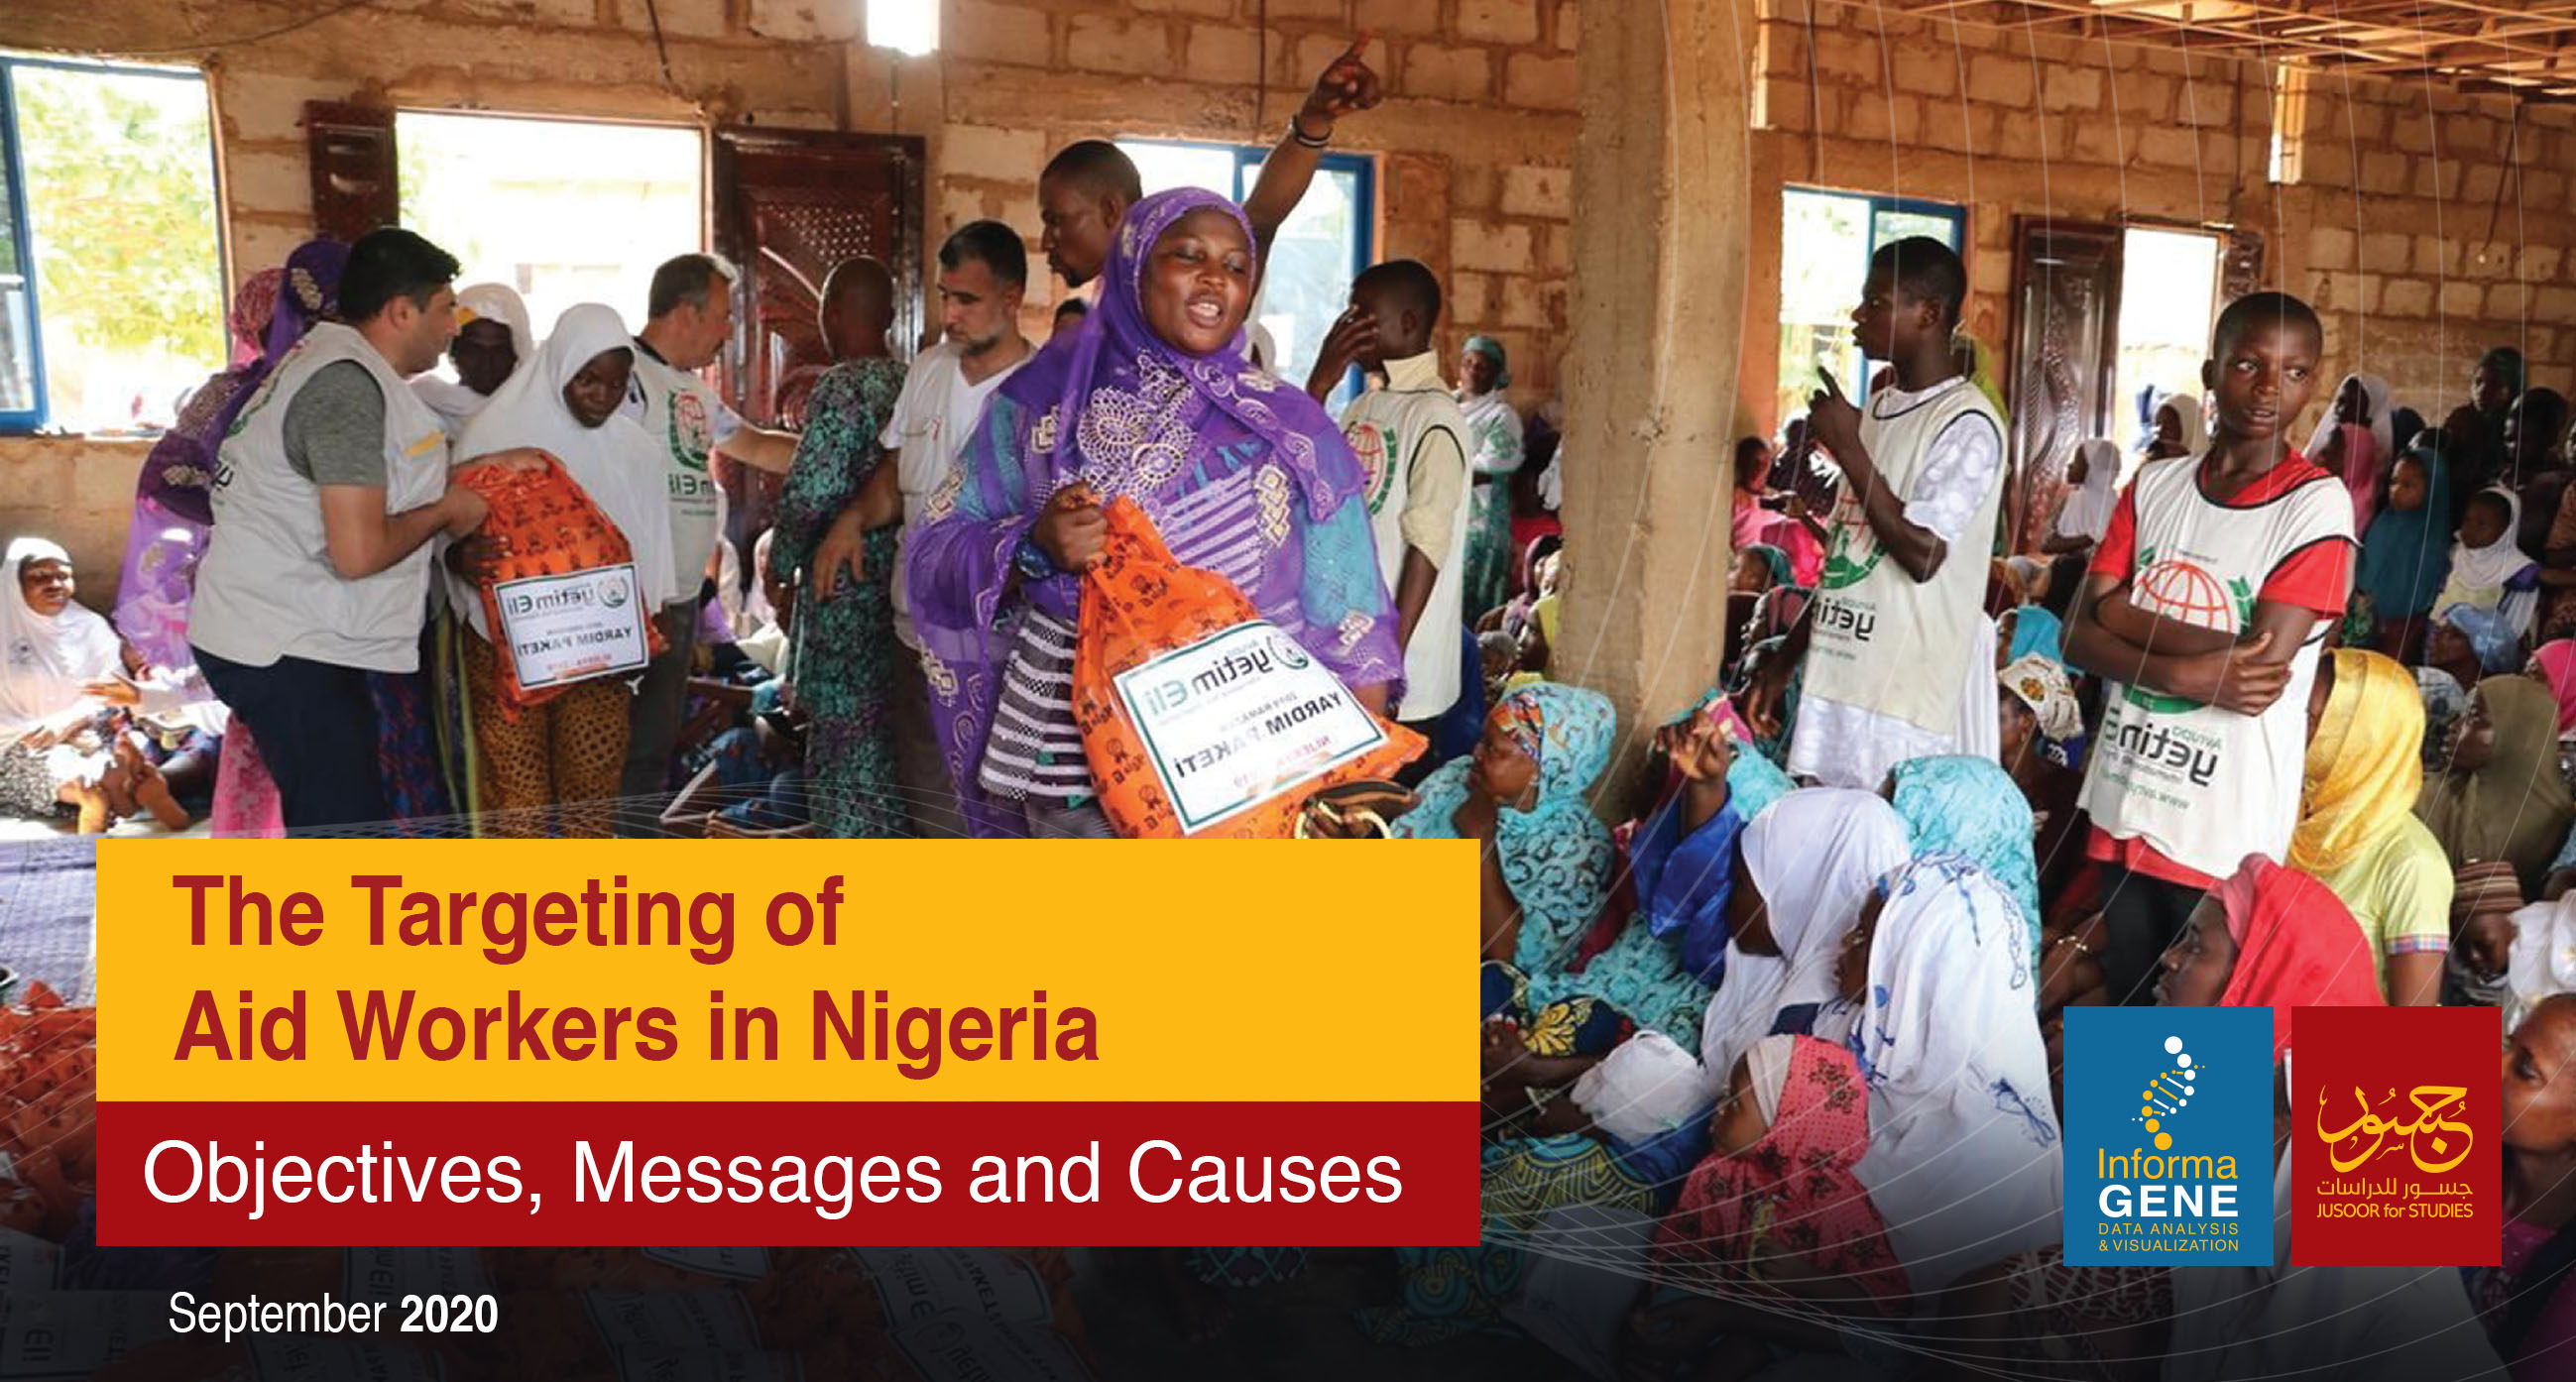 The Targeting of Aid Workers in Nigeria,, Objectives, Messages and Causes